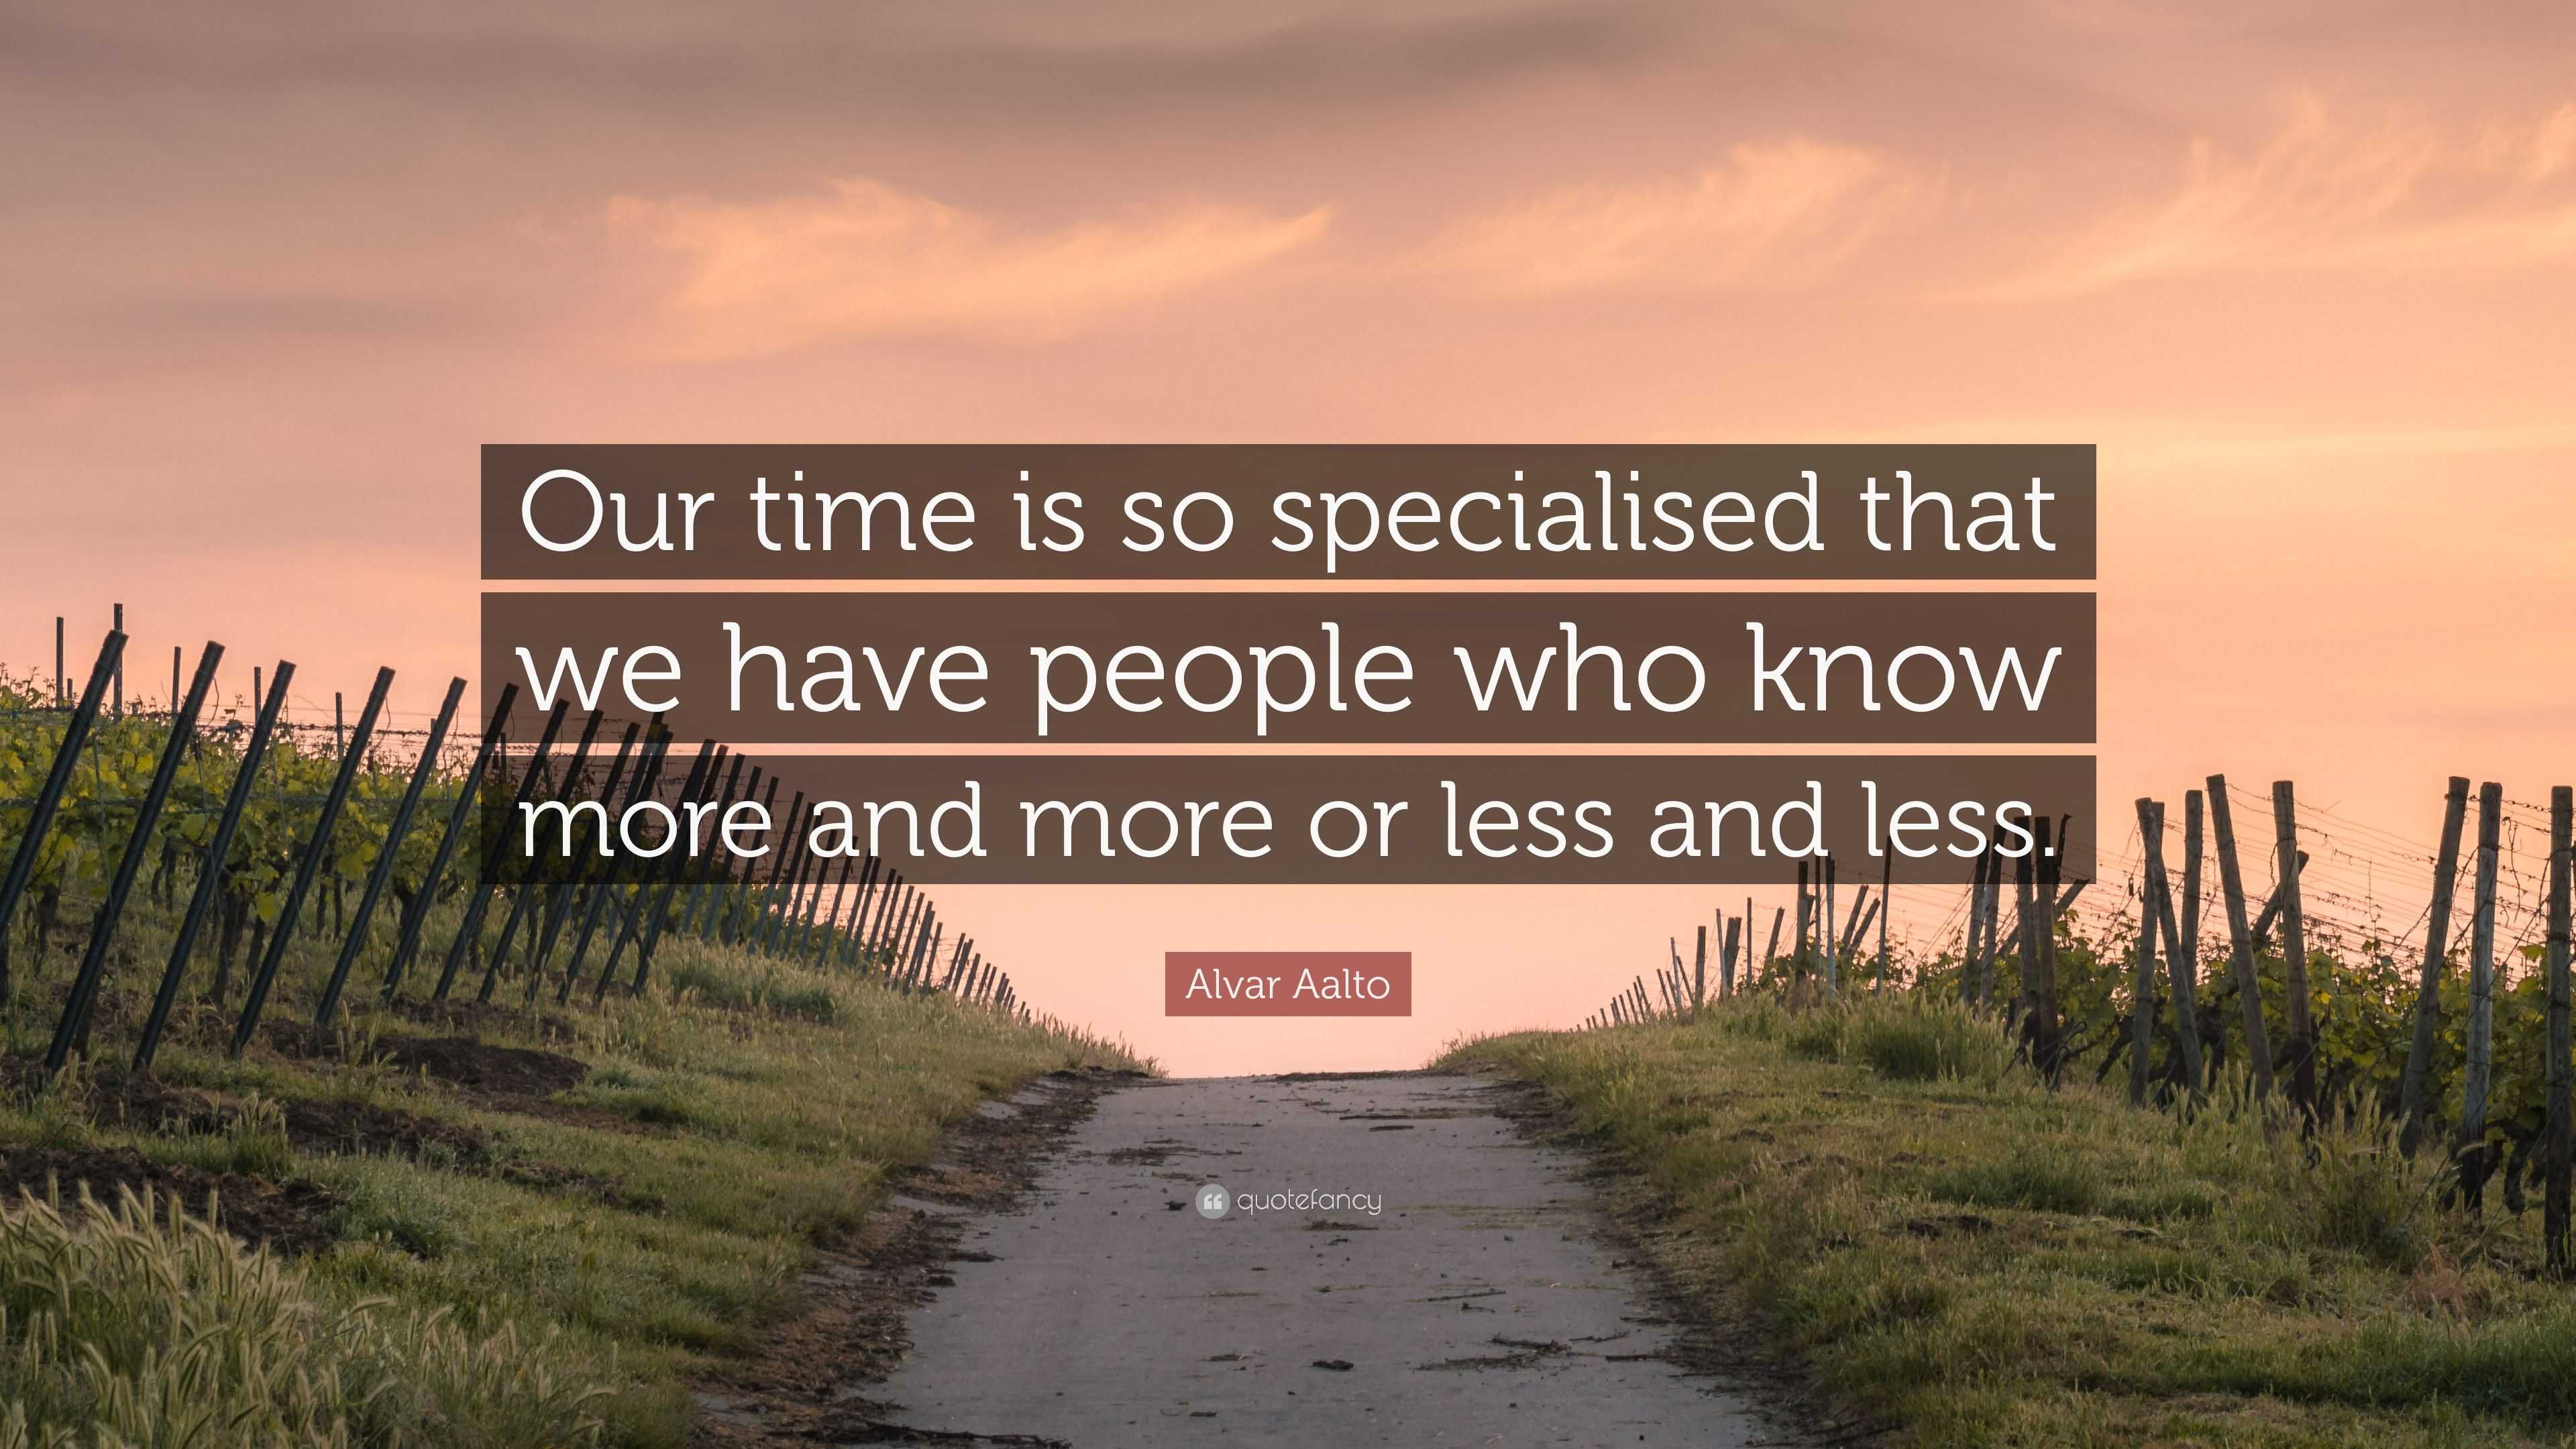 Alvar Aalto Quote: “Our time is so specialised that we have people who ...